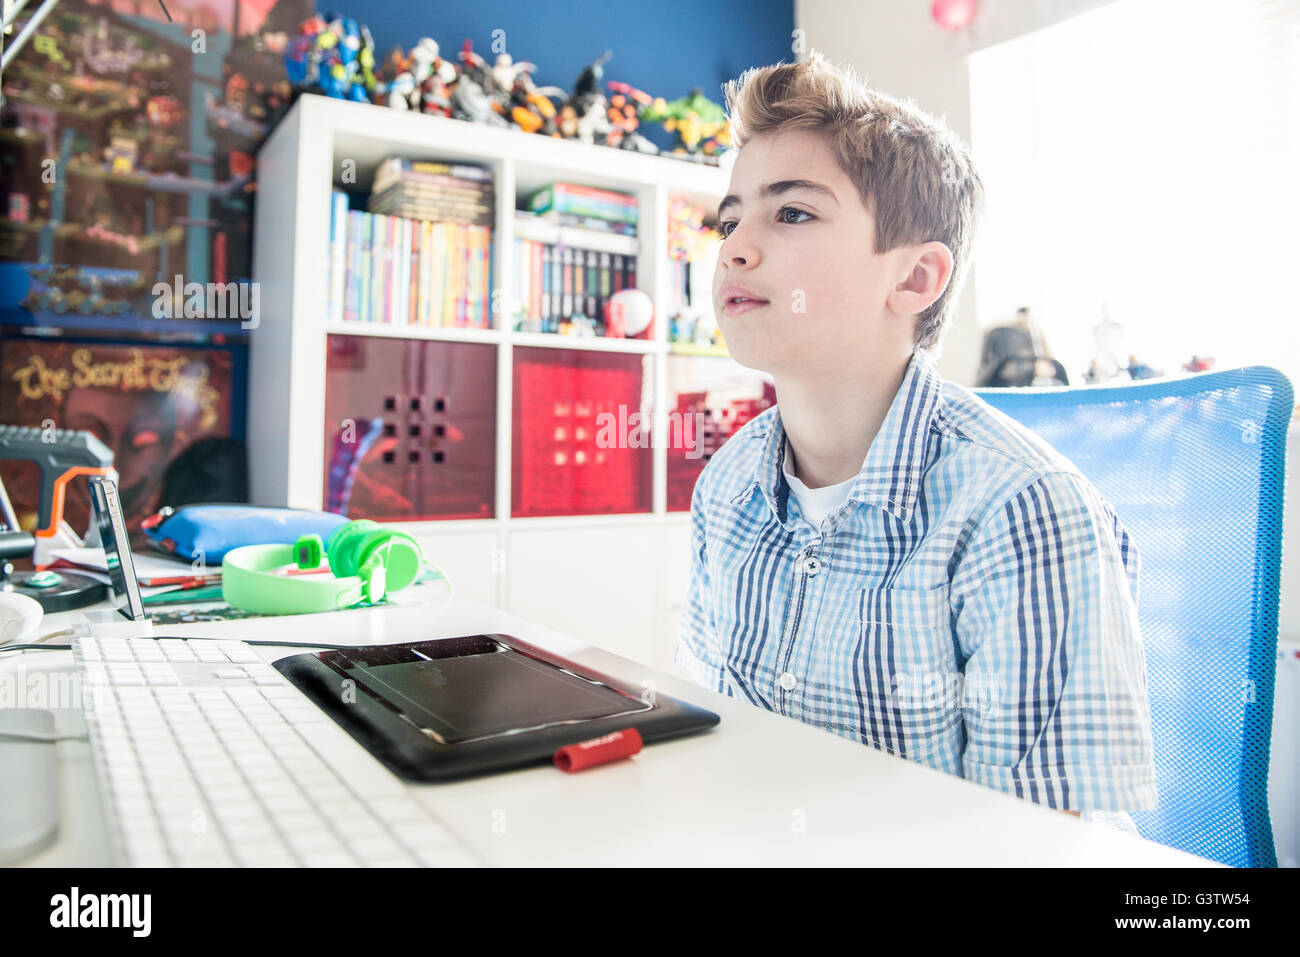 A ten year old boy sitting at a computer in his bedroom. Stock Photo